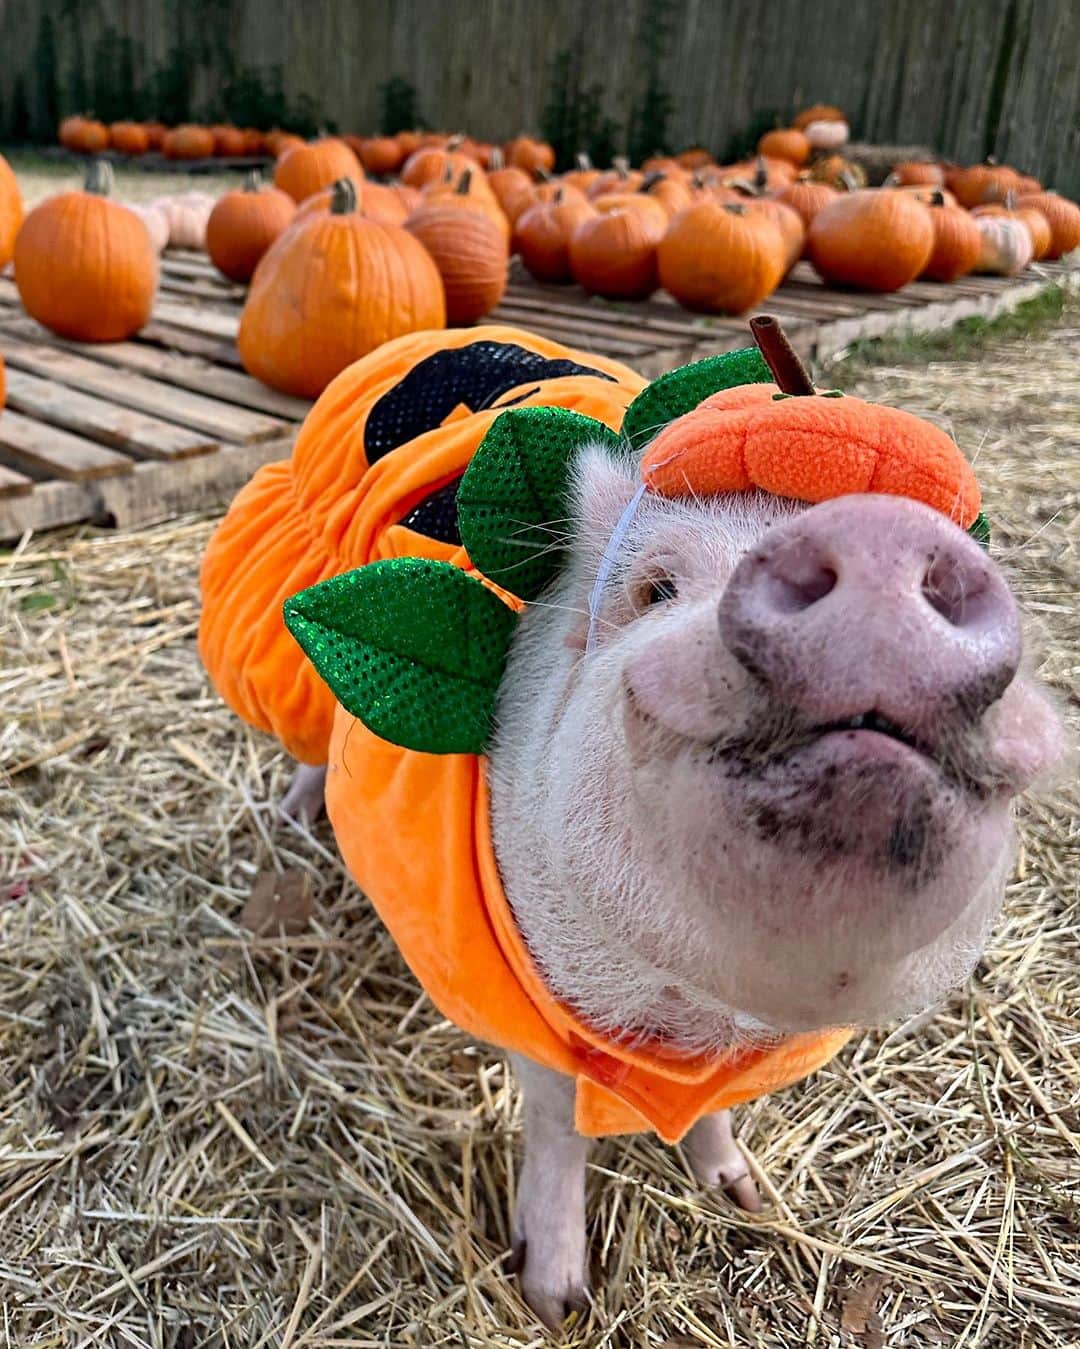 Priscilla and Poppletonのインスタグラム：「What happens in the pumpkin patch, stays in the pumpkin patch! No, we didn’t eat any, but we sure had a blast rooting around. More of our adventure to come…🐷🎃 #PiggyPenn #cutestpumpkininthepatch #ortegapumpkinpatch #PrissyandPop」